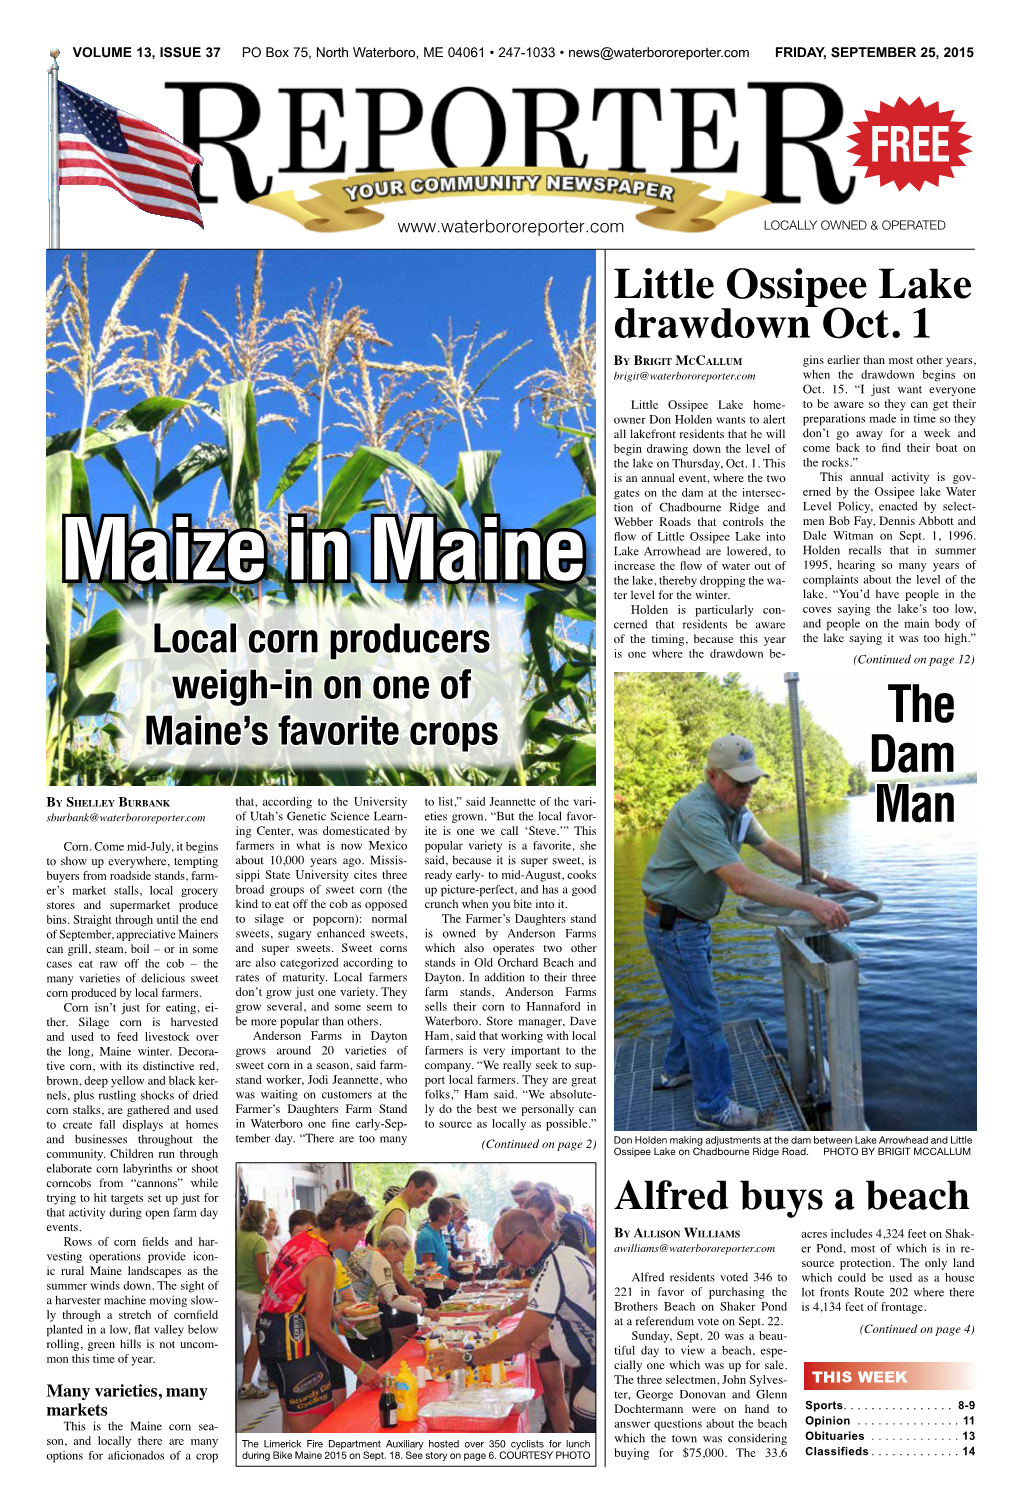 Maize in Maine the Lake, Thereby Dropping the Wa- Complaints About the Level of the Ter Level for the Winter